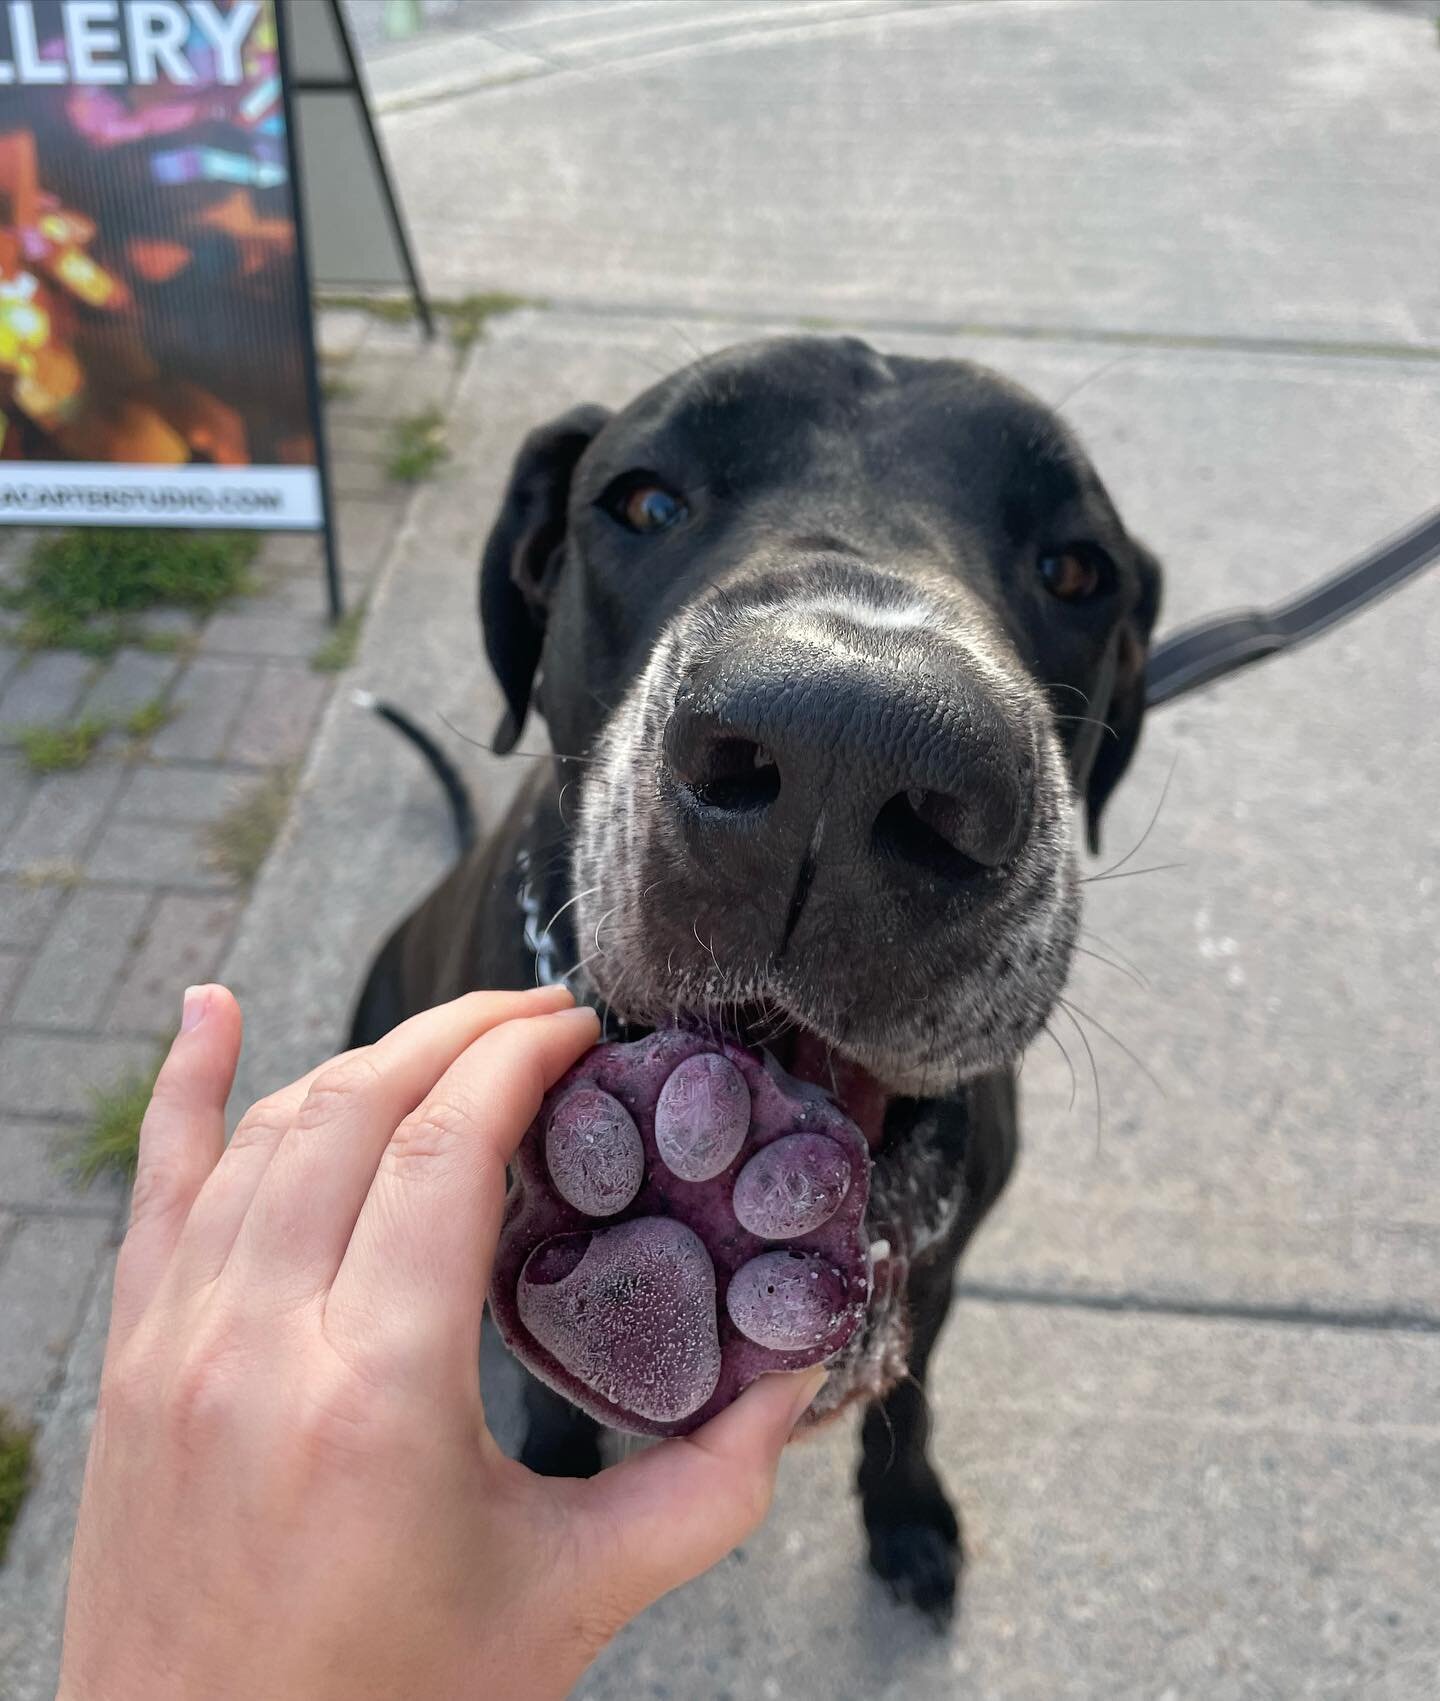 Our spokespup Tex is loving our new pupsicles 🐾

The perfect treat for your pup on a warm day! Offered in 3 flavours:
Banana Peanut Butter
Blueberry
Watermelon Carrot

100% Tex approved 😋